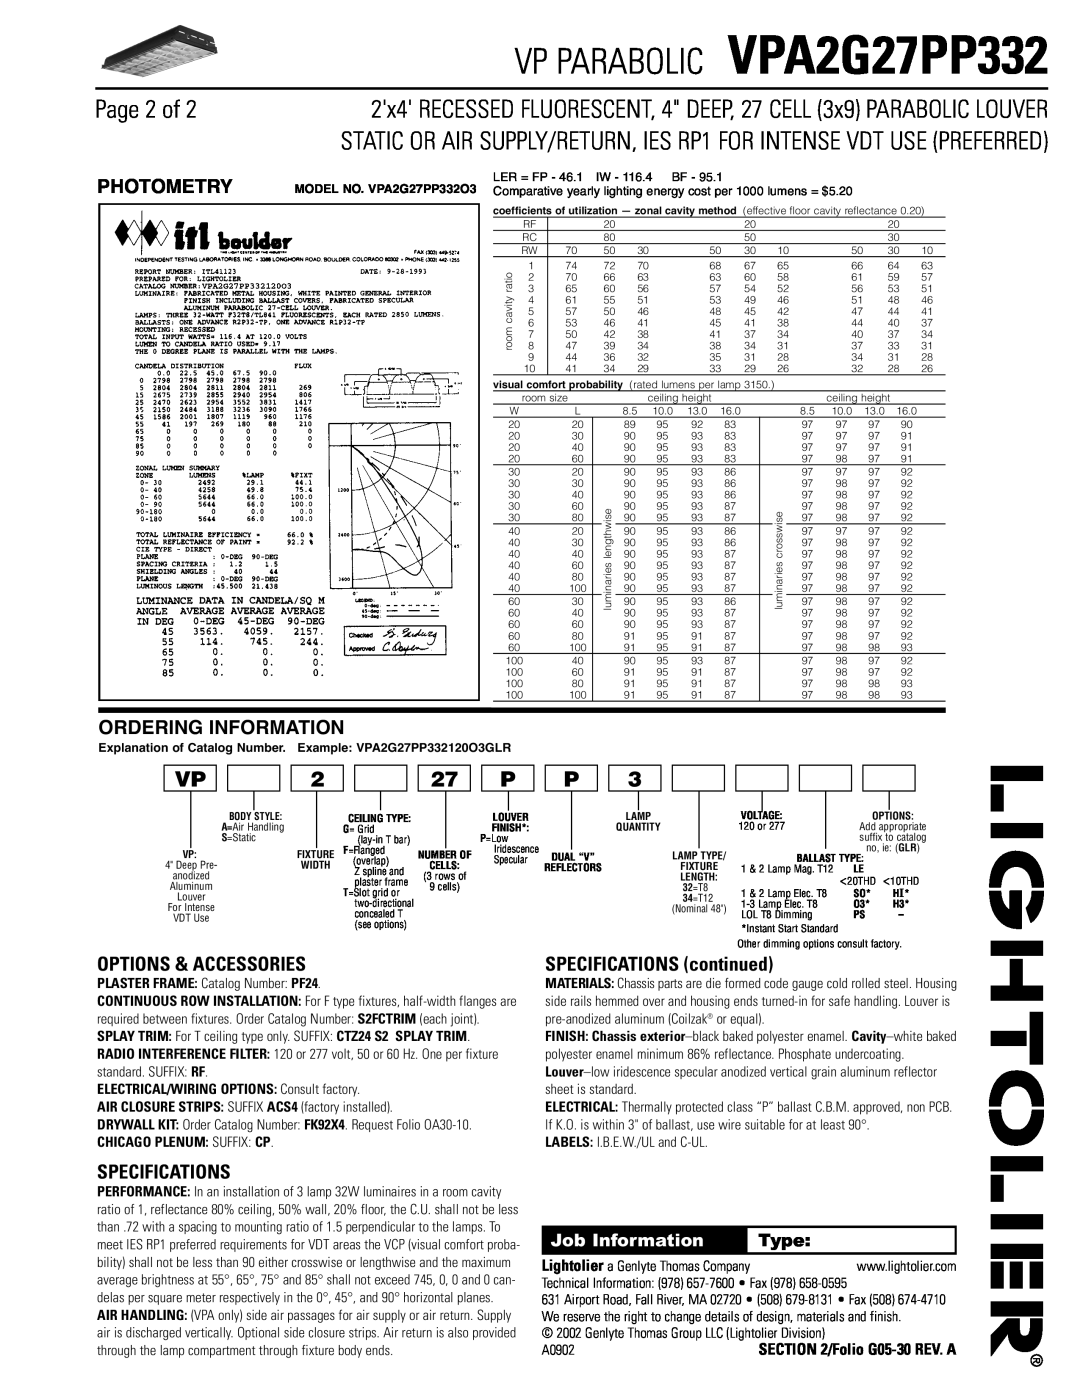 Lightolier VPA2G27PP332 dimensions Page 2 of, Options & Accessories, Specifications, SPECIFICATIONS continued, Photometry 